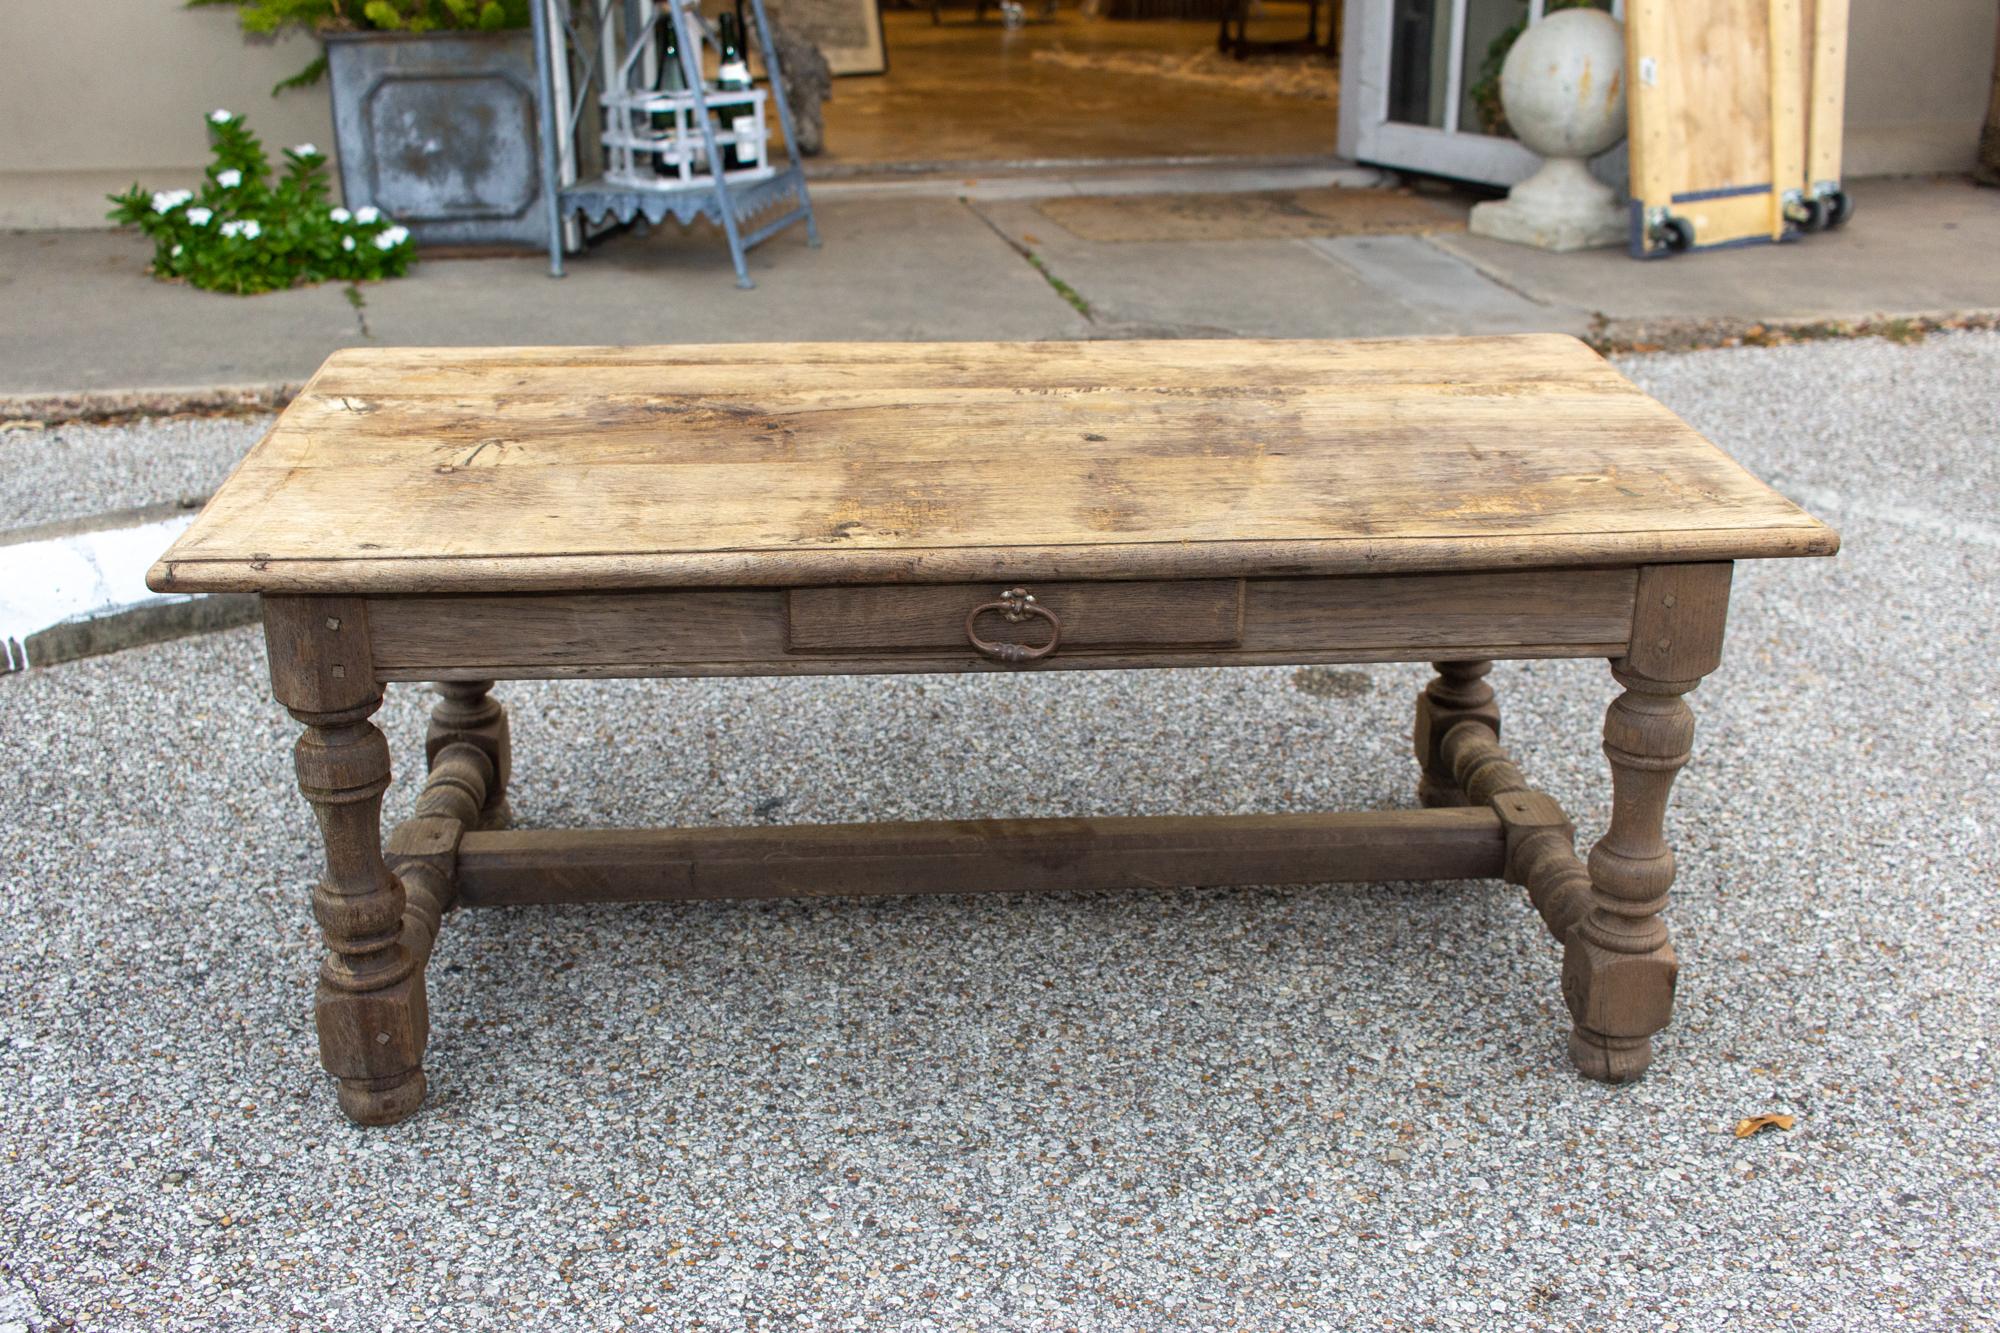 This distressed, solid oak coffee table was sourced in France and dates to the 1920s. The gray weathered finish to the wood is both beautiful and interesting. This coffee table has a single central drawer with a heavy iron ring-pull. There are